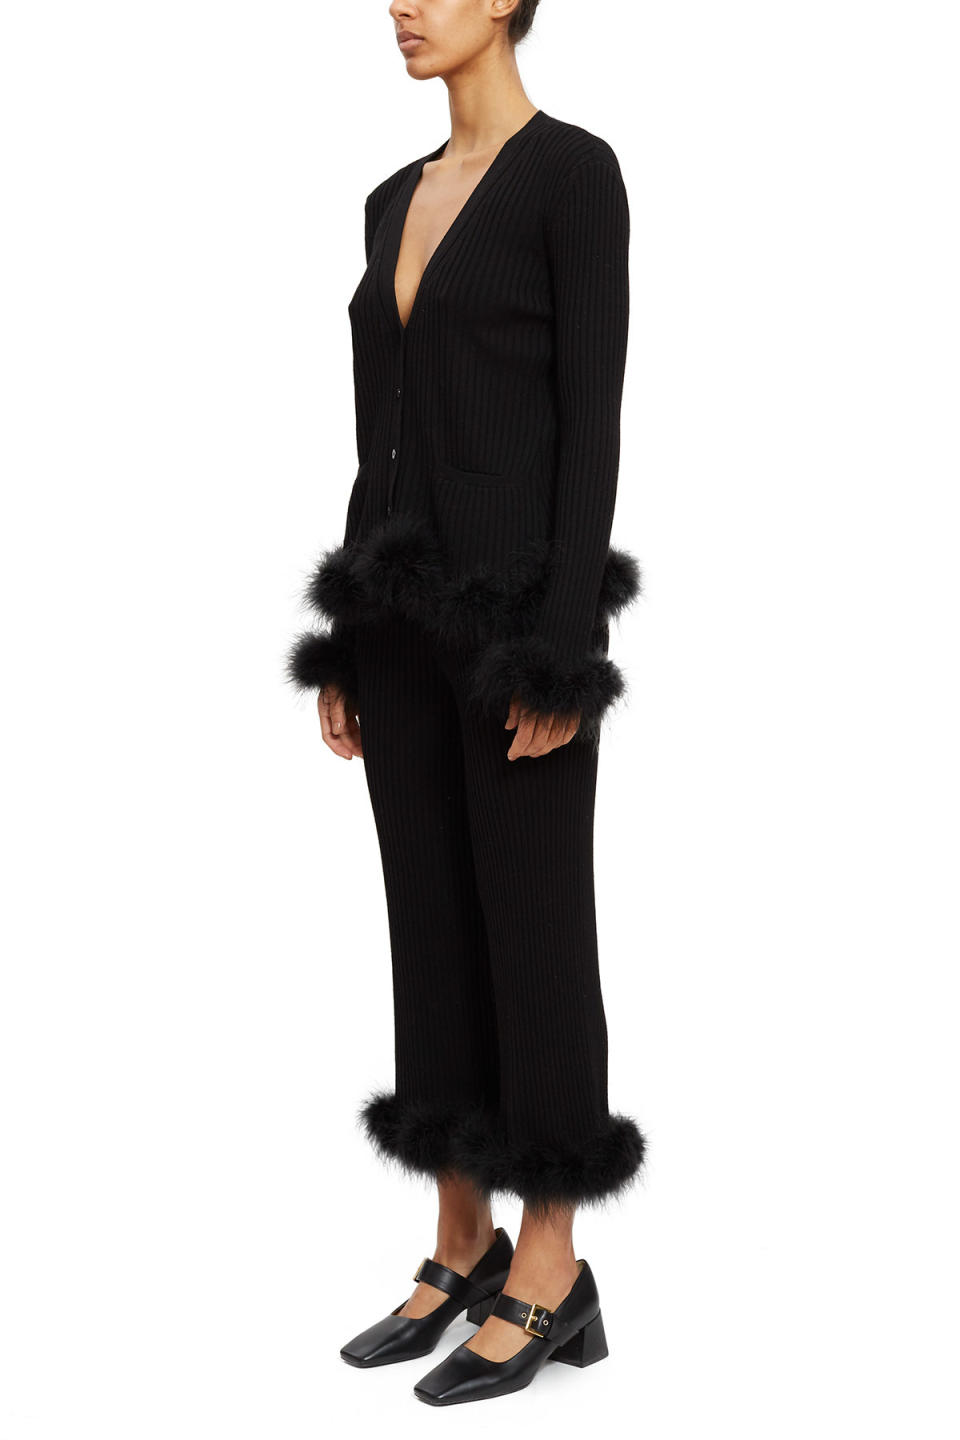 Opening Ceremony black ostrich feather cardigan and culottes. (Credit: Opening Ceremony)